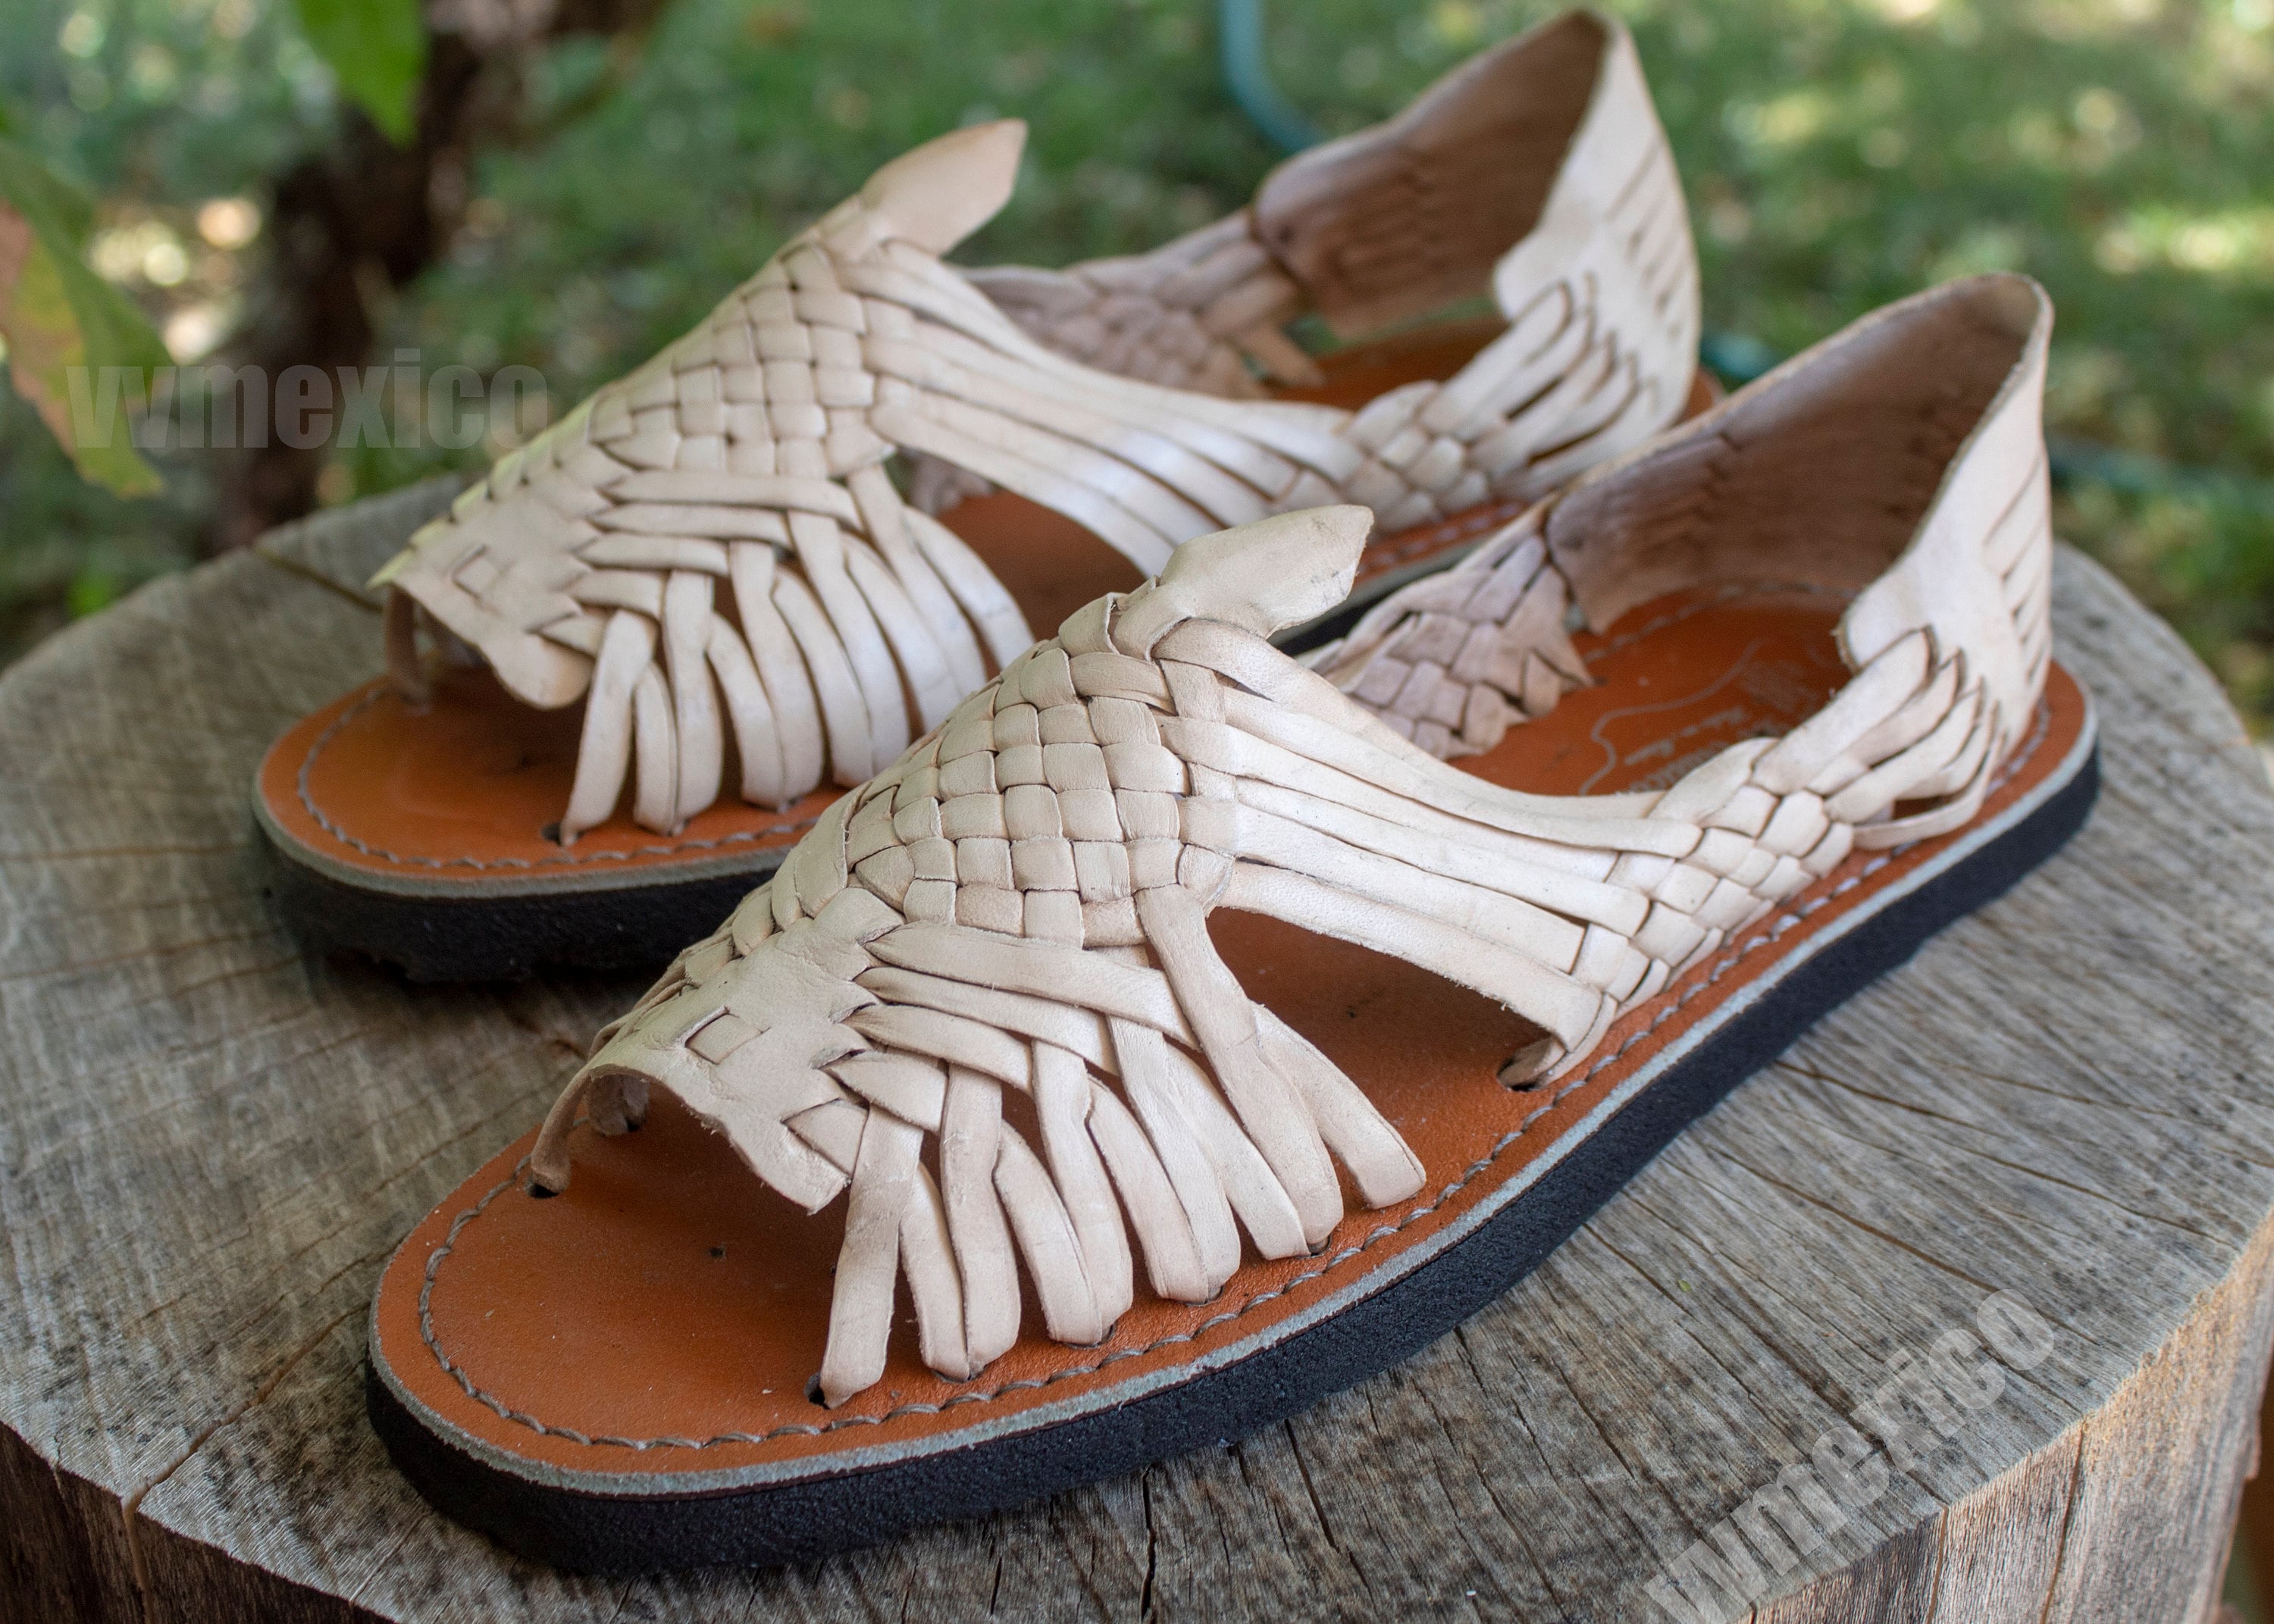 vos roekeloos Pathologisch MENS LEATHER HUARACHE Sandals Vintage Style Made in Mexico - Etsy